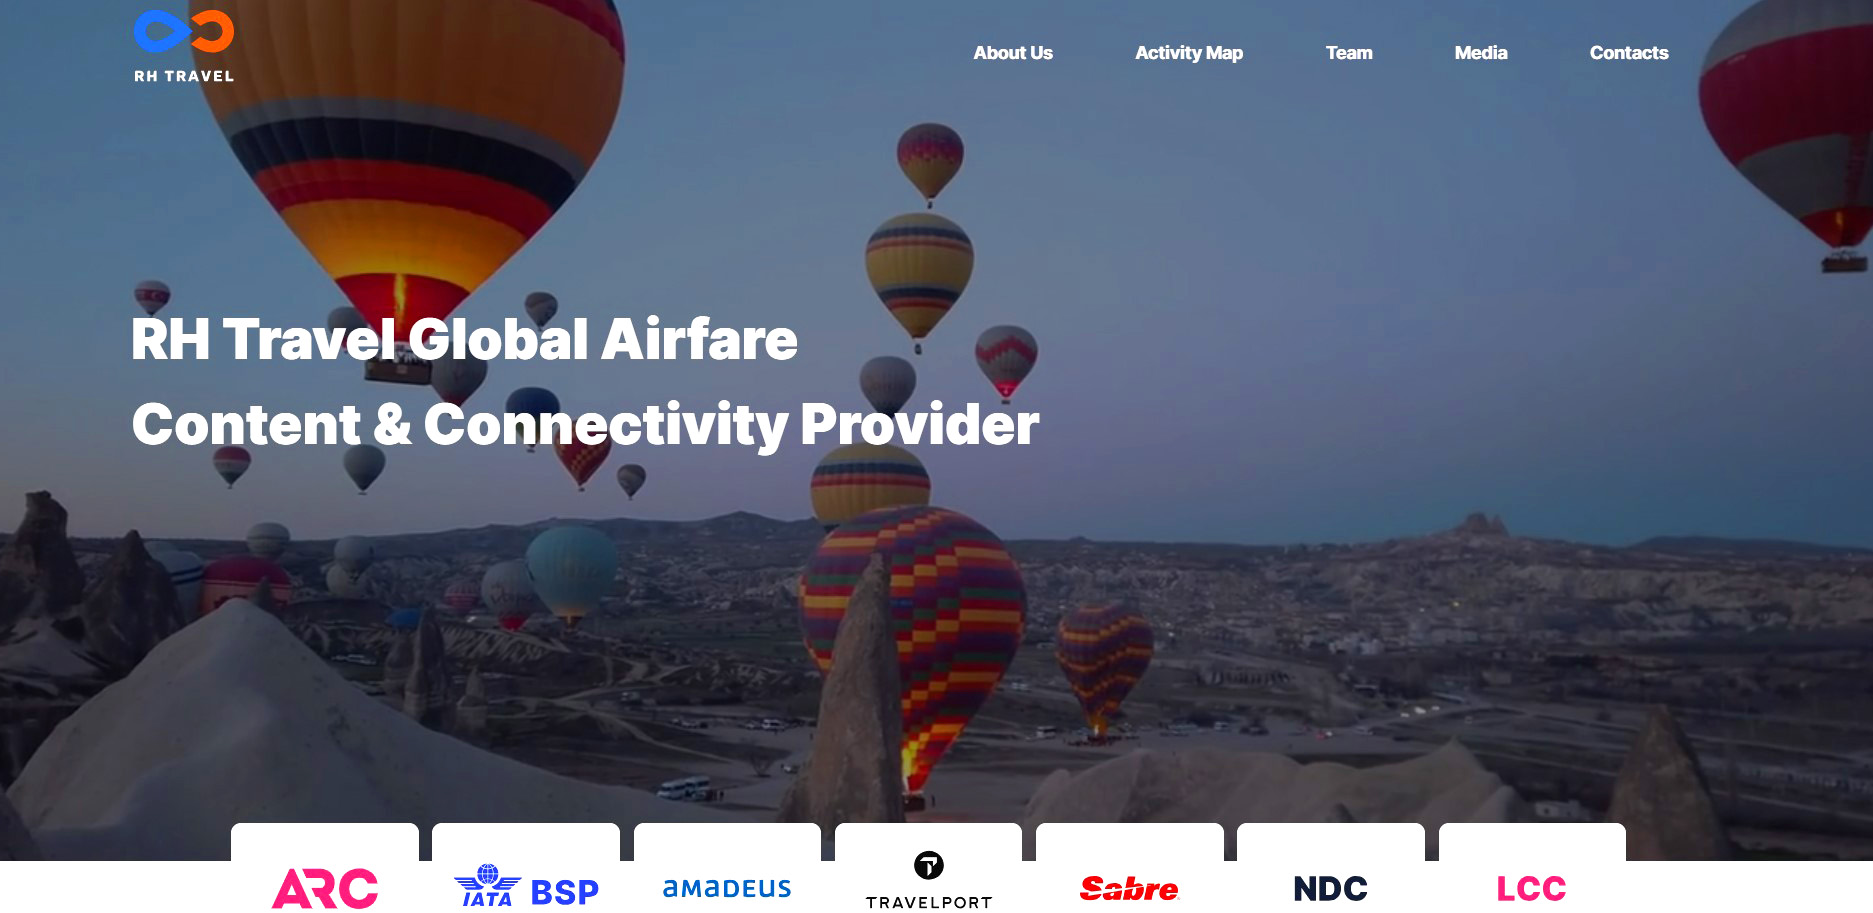 "Designed with a User-Centric Approach". RH Travel Launches Corporate Website